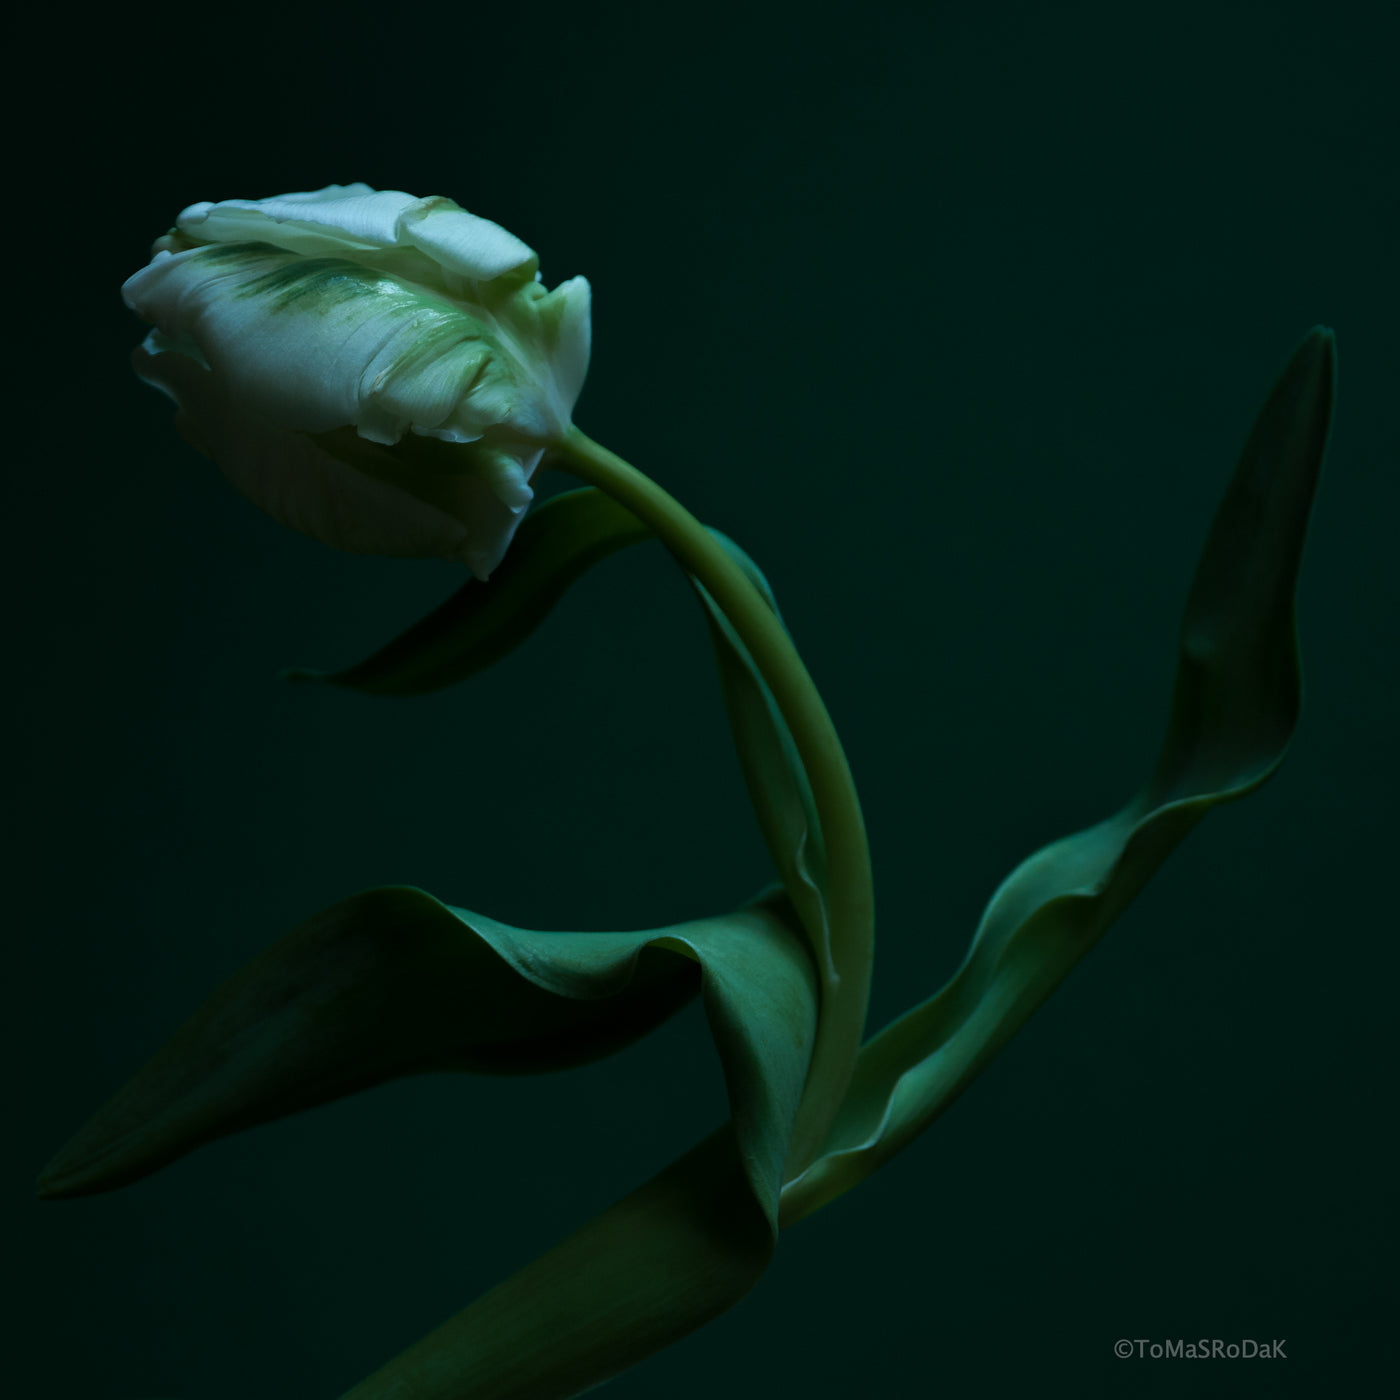 Tulips, paper prints and art photos taken by Tomas Rodak offered for sale by TOMs FLOWer CLUB. 